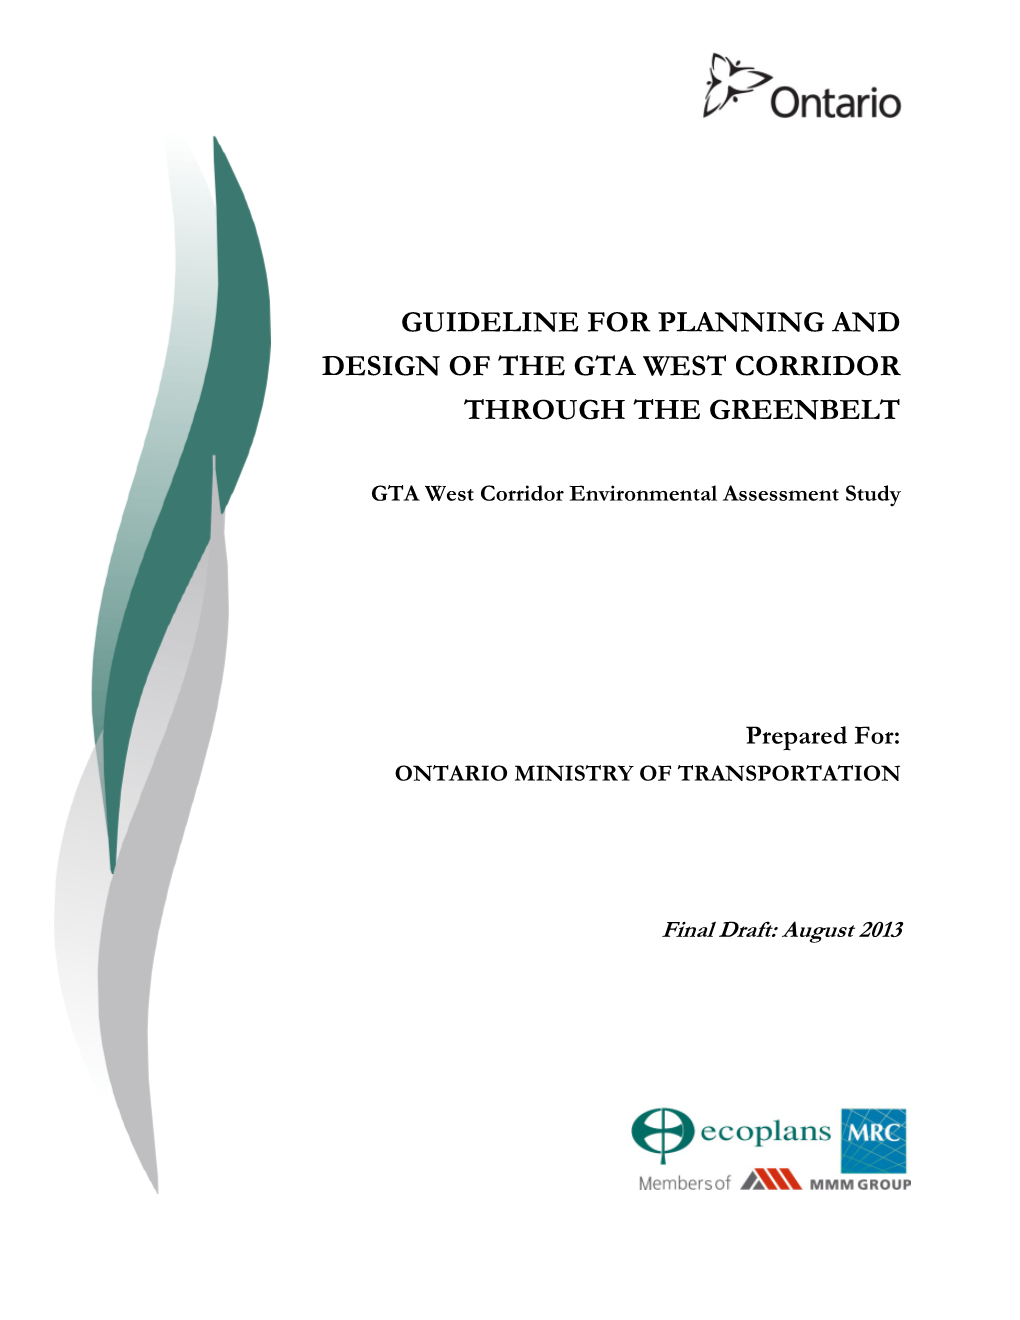 Guideline for Planning and Design of the Gta West Corridor Through the Greenbelt